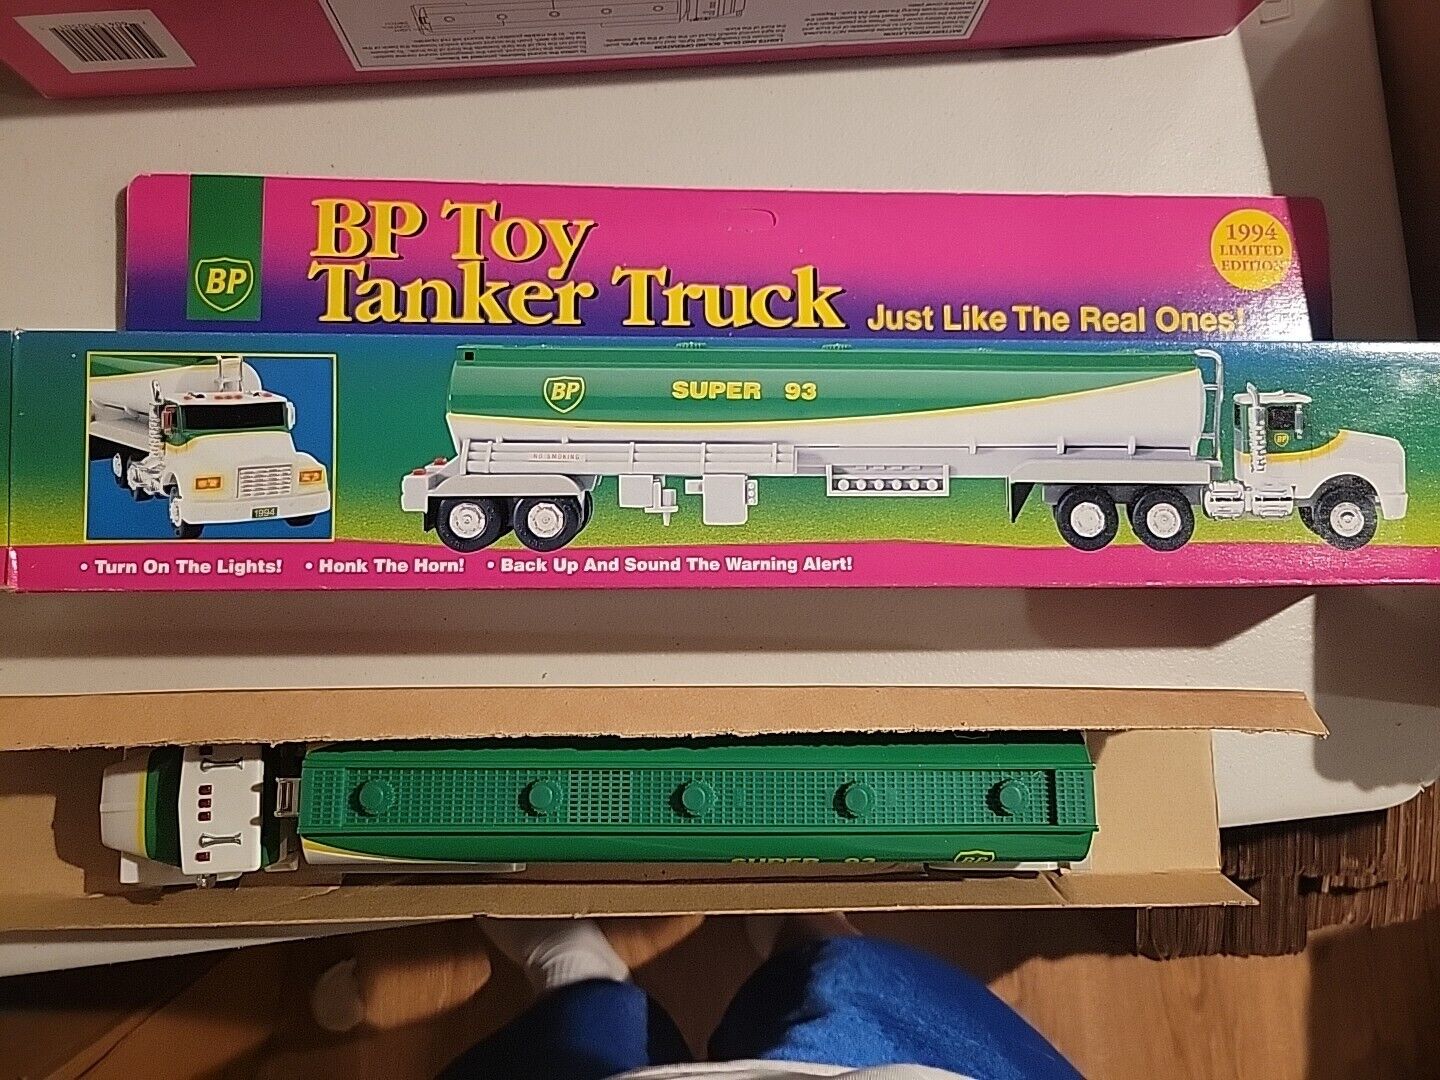 Limited Edition 1994 BP Toy Tanker Truck Super 93 (New In Original Box)